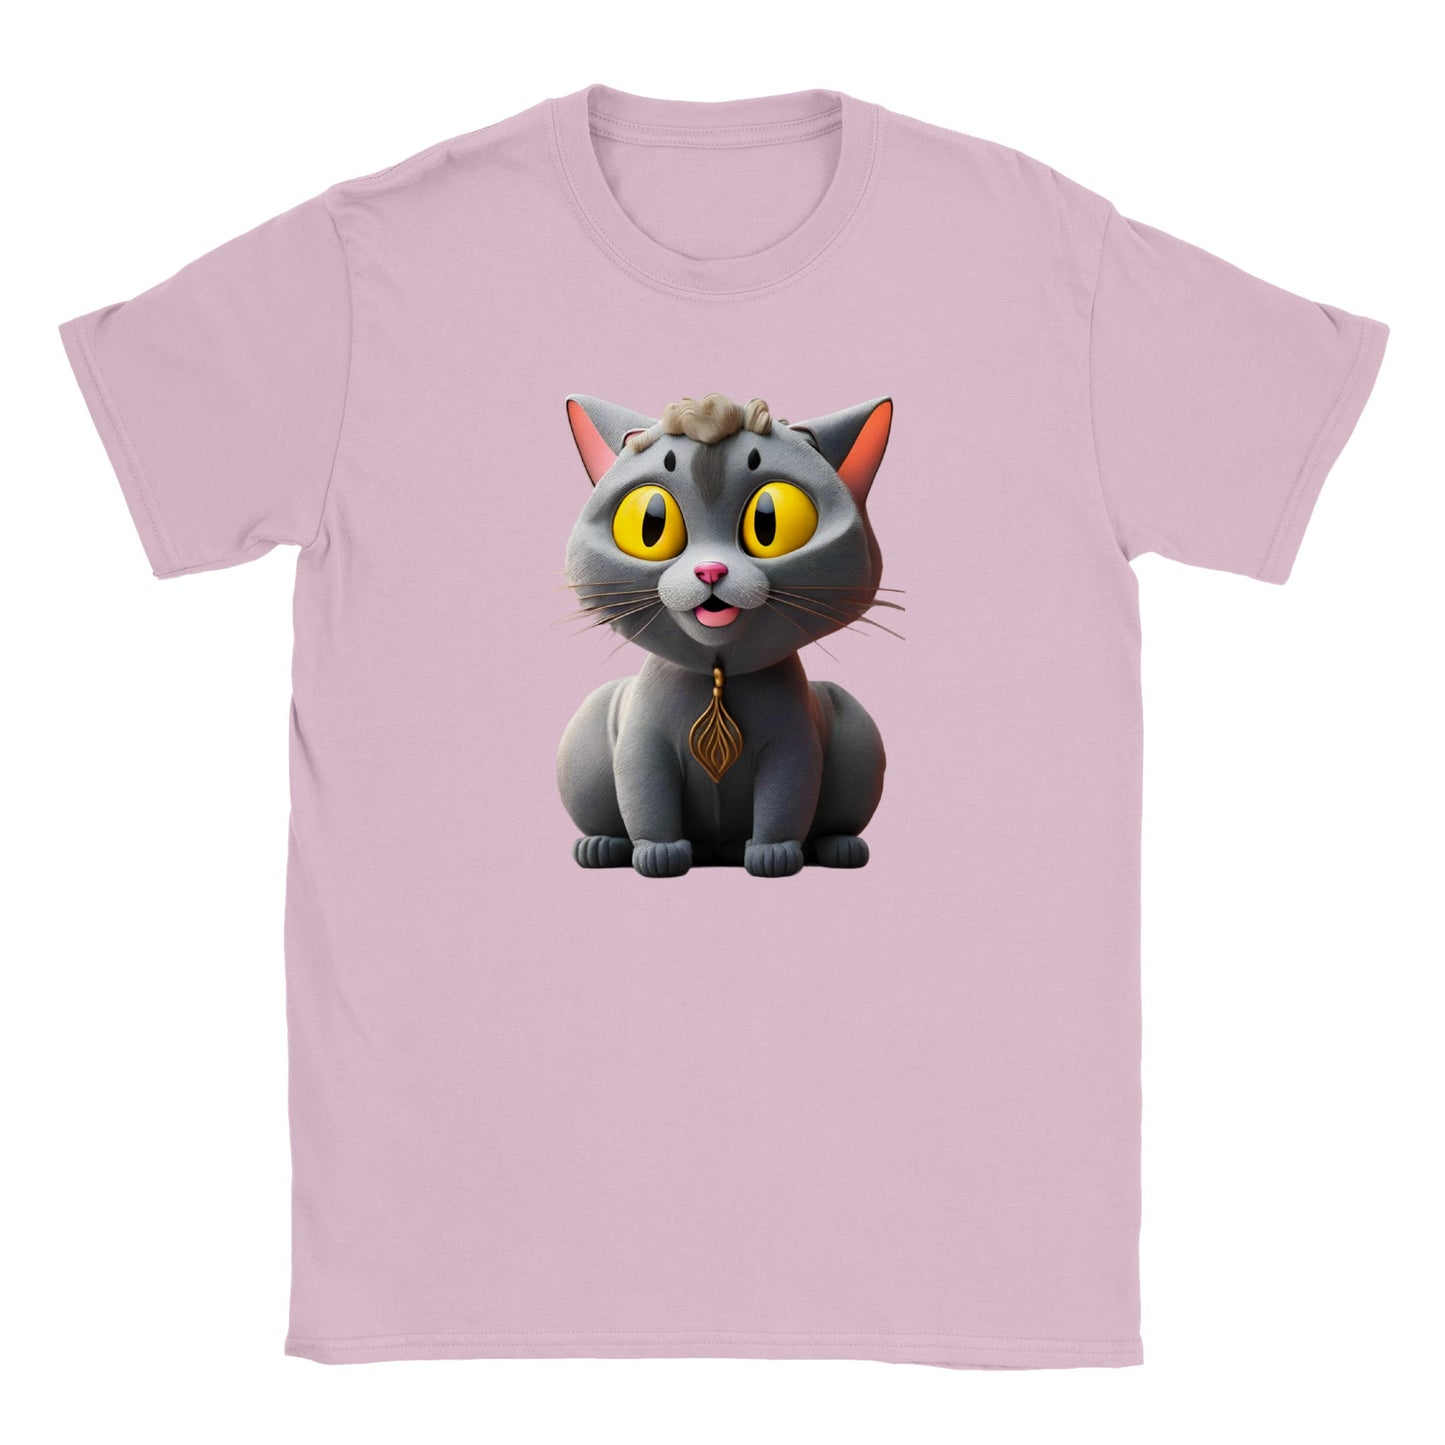 Adorable, Cool, Cute Cats and Kittens Toy - Classic Kids Crewneck T-Shirt 53